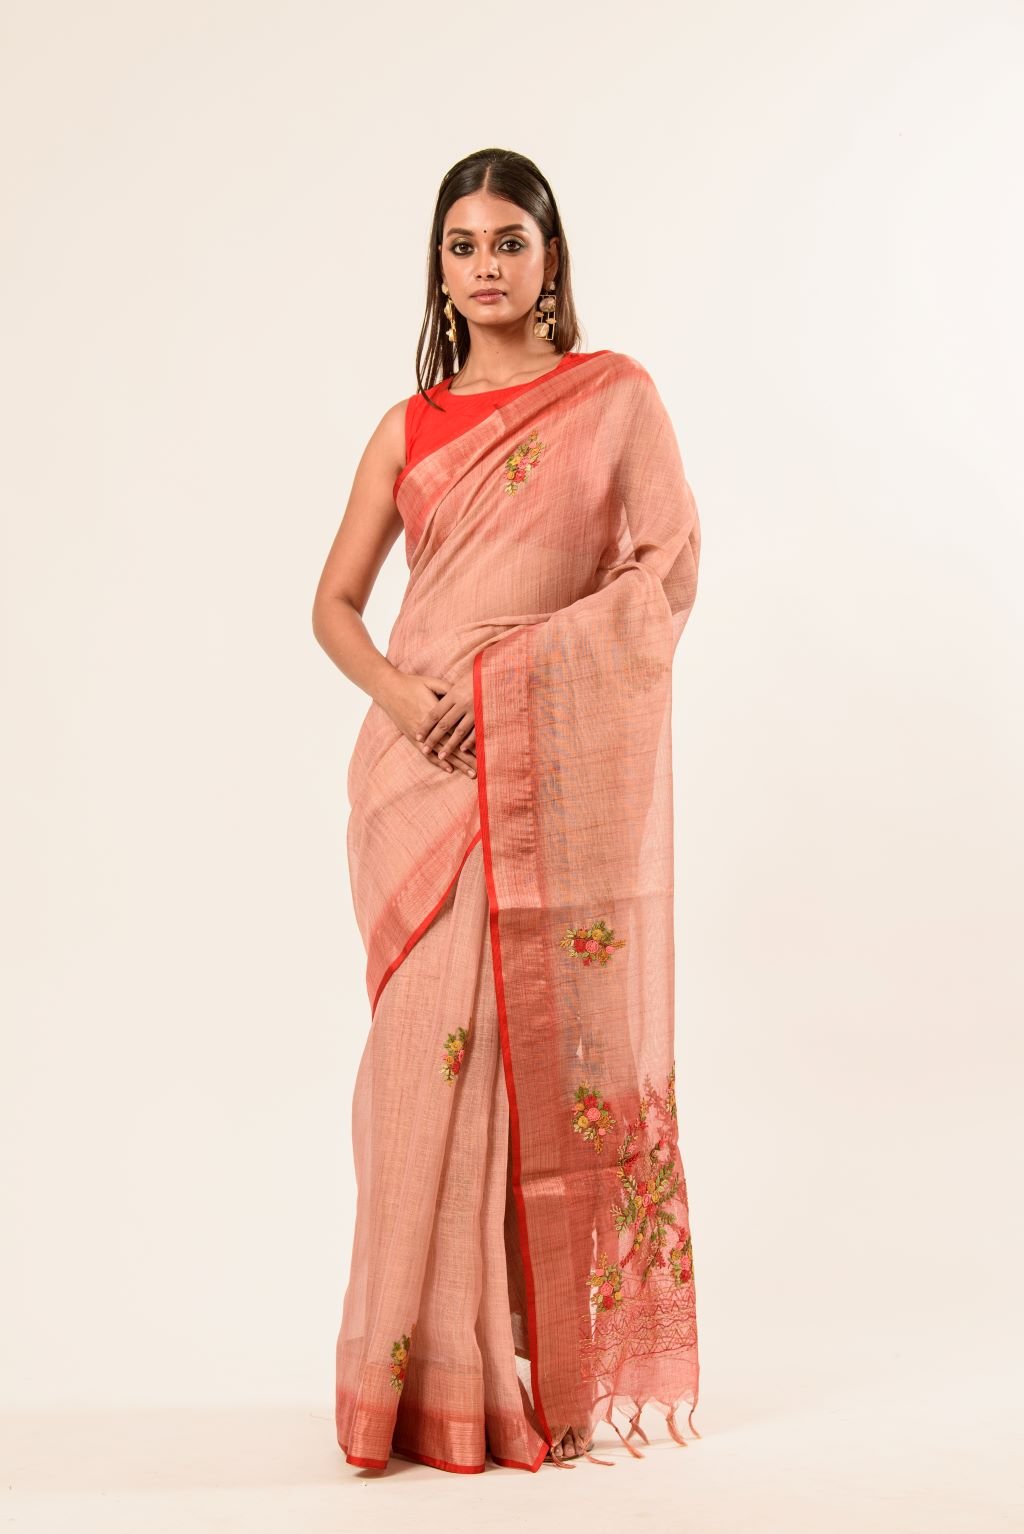 Handloom Cotton Linen Saree with Hand Embroidered Work - Anvi Couture